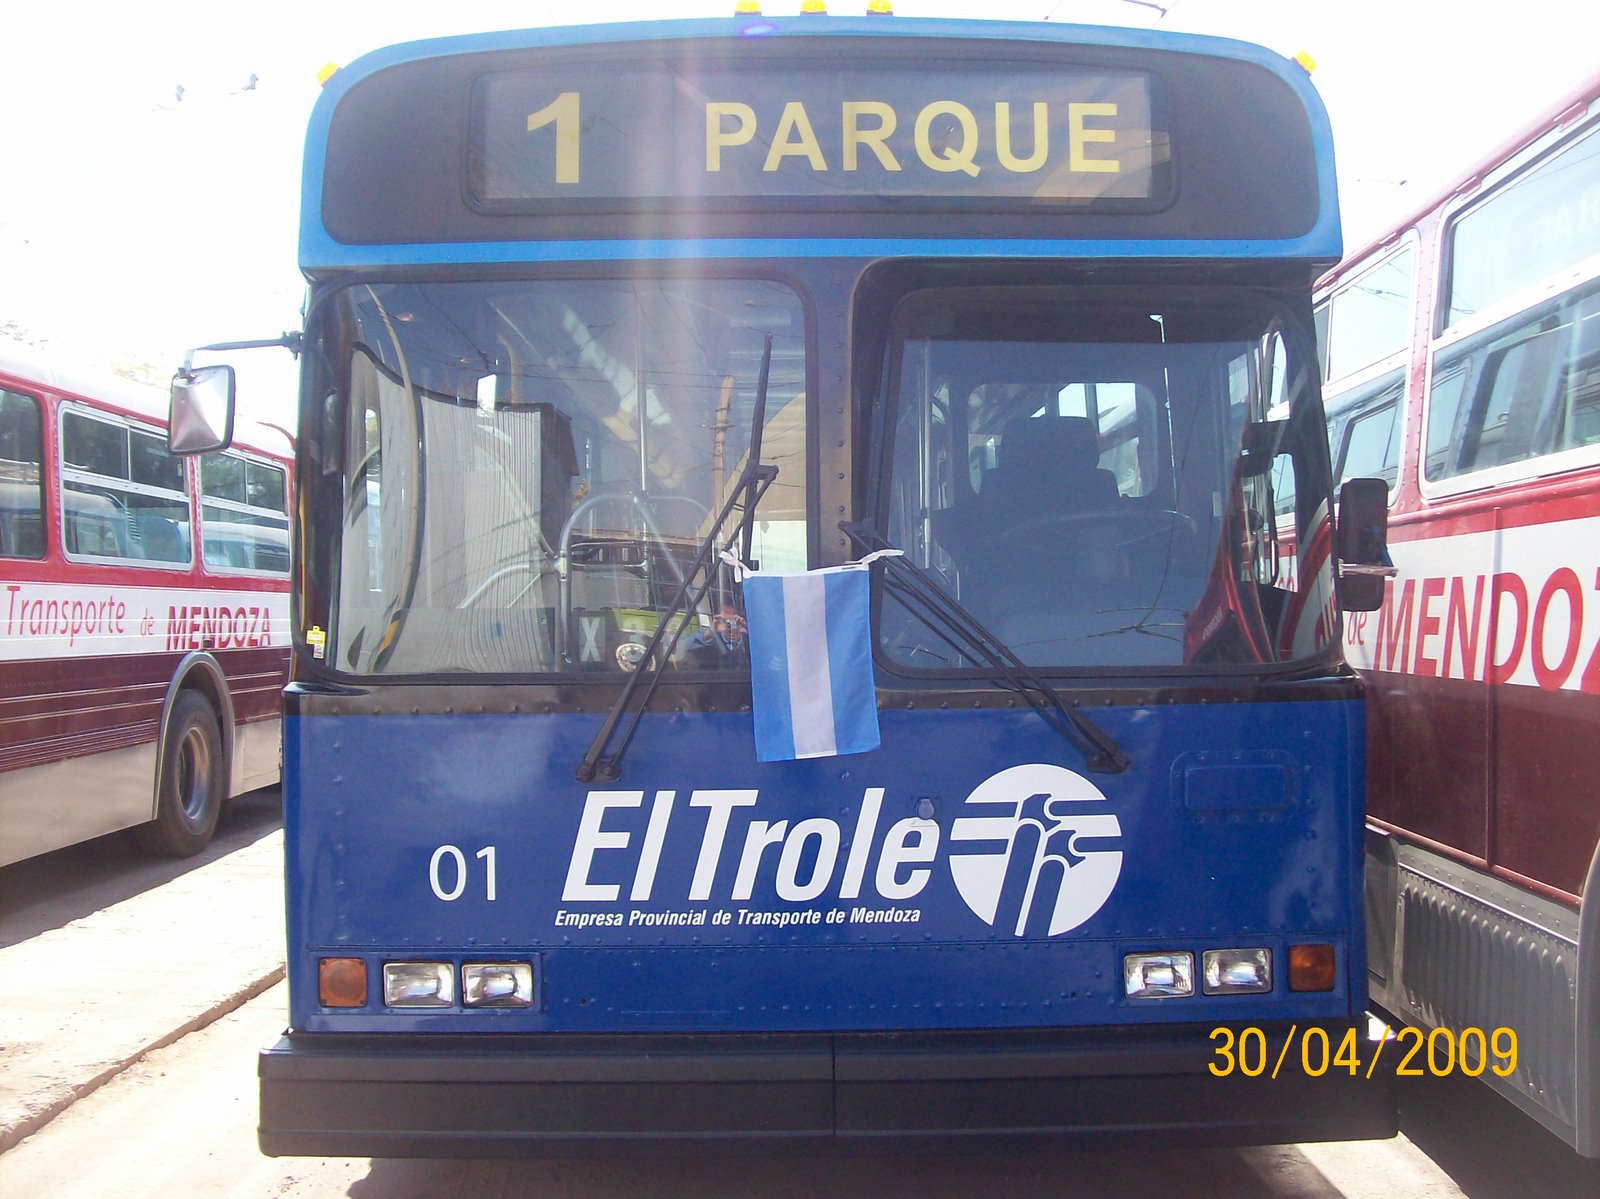 Trolley 01, with the Argentina flag on its front! Photo by Jorge Luis Guevara.